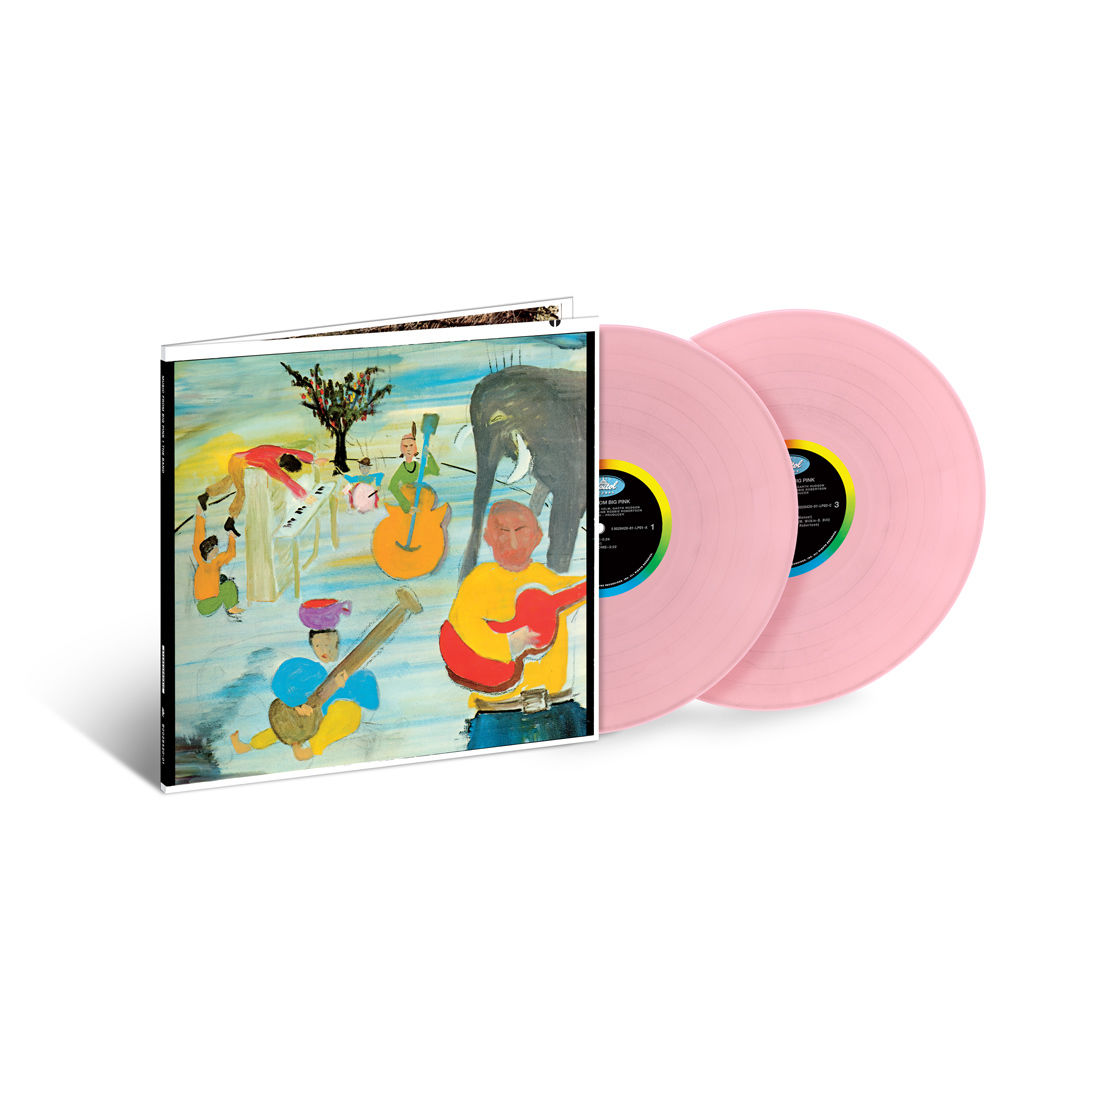 THE BAND / ザ・バンド / MUSIC FROM BIG PINK - 50TH ANNIVERSARY EDITION (PINK COLORED 180G 2LP)